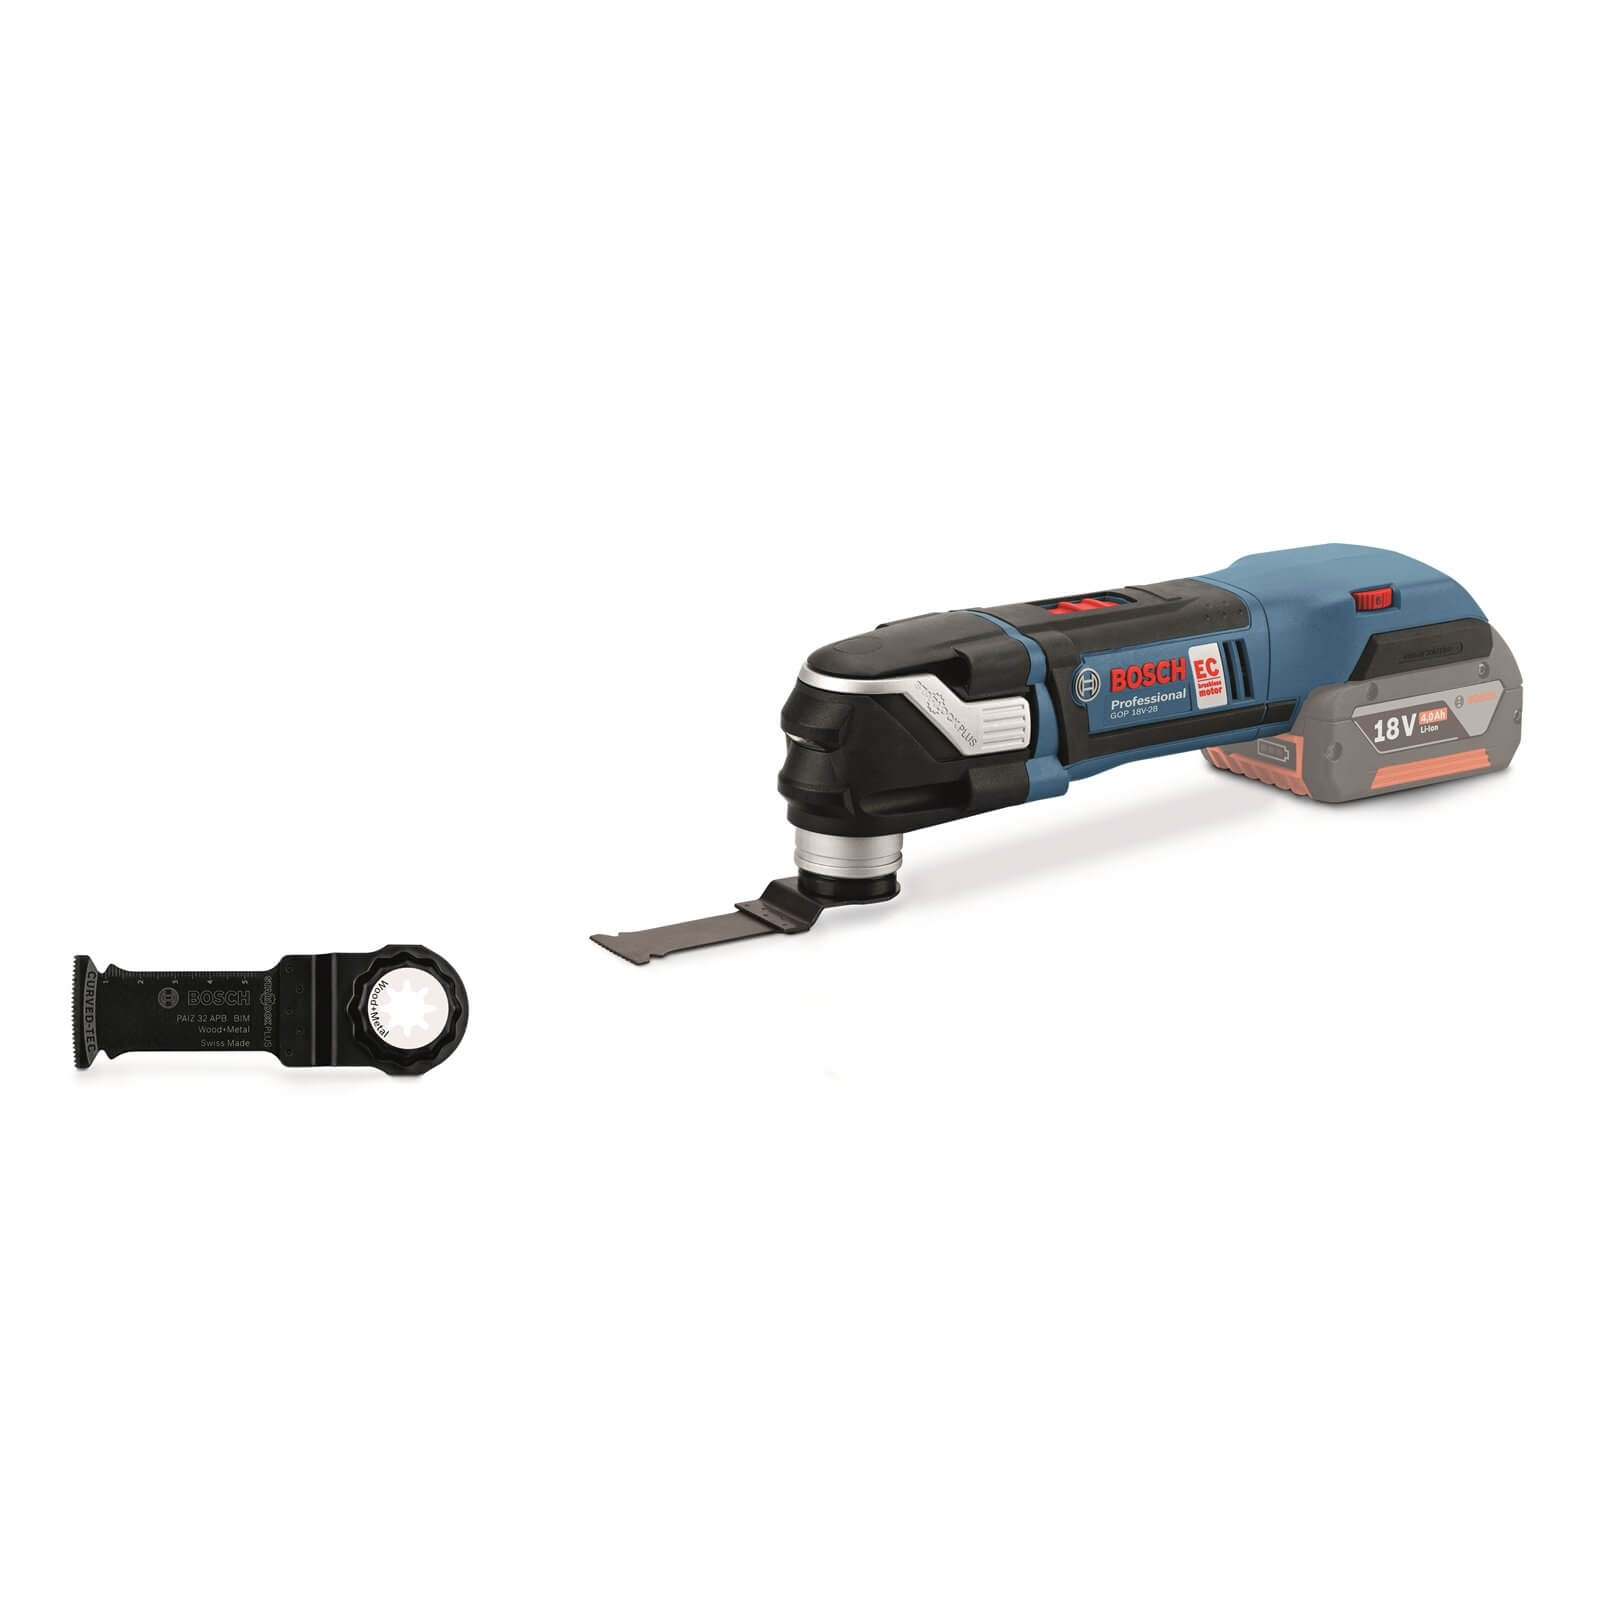 Bosch Pro 18V Brushless Multi-Tool (No Batteries Included)